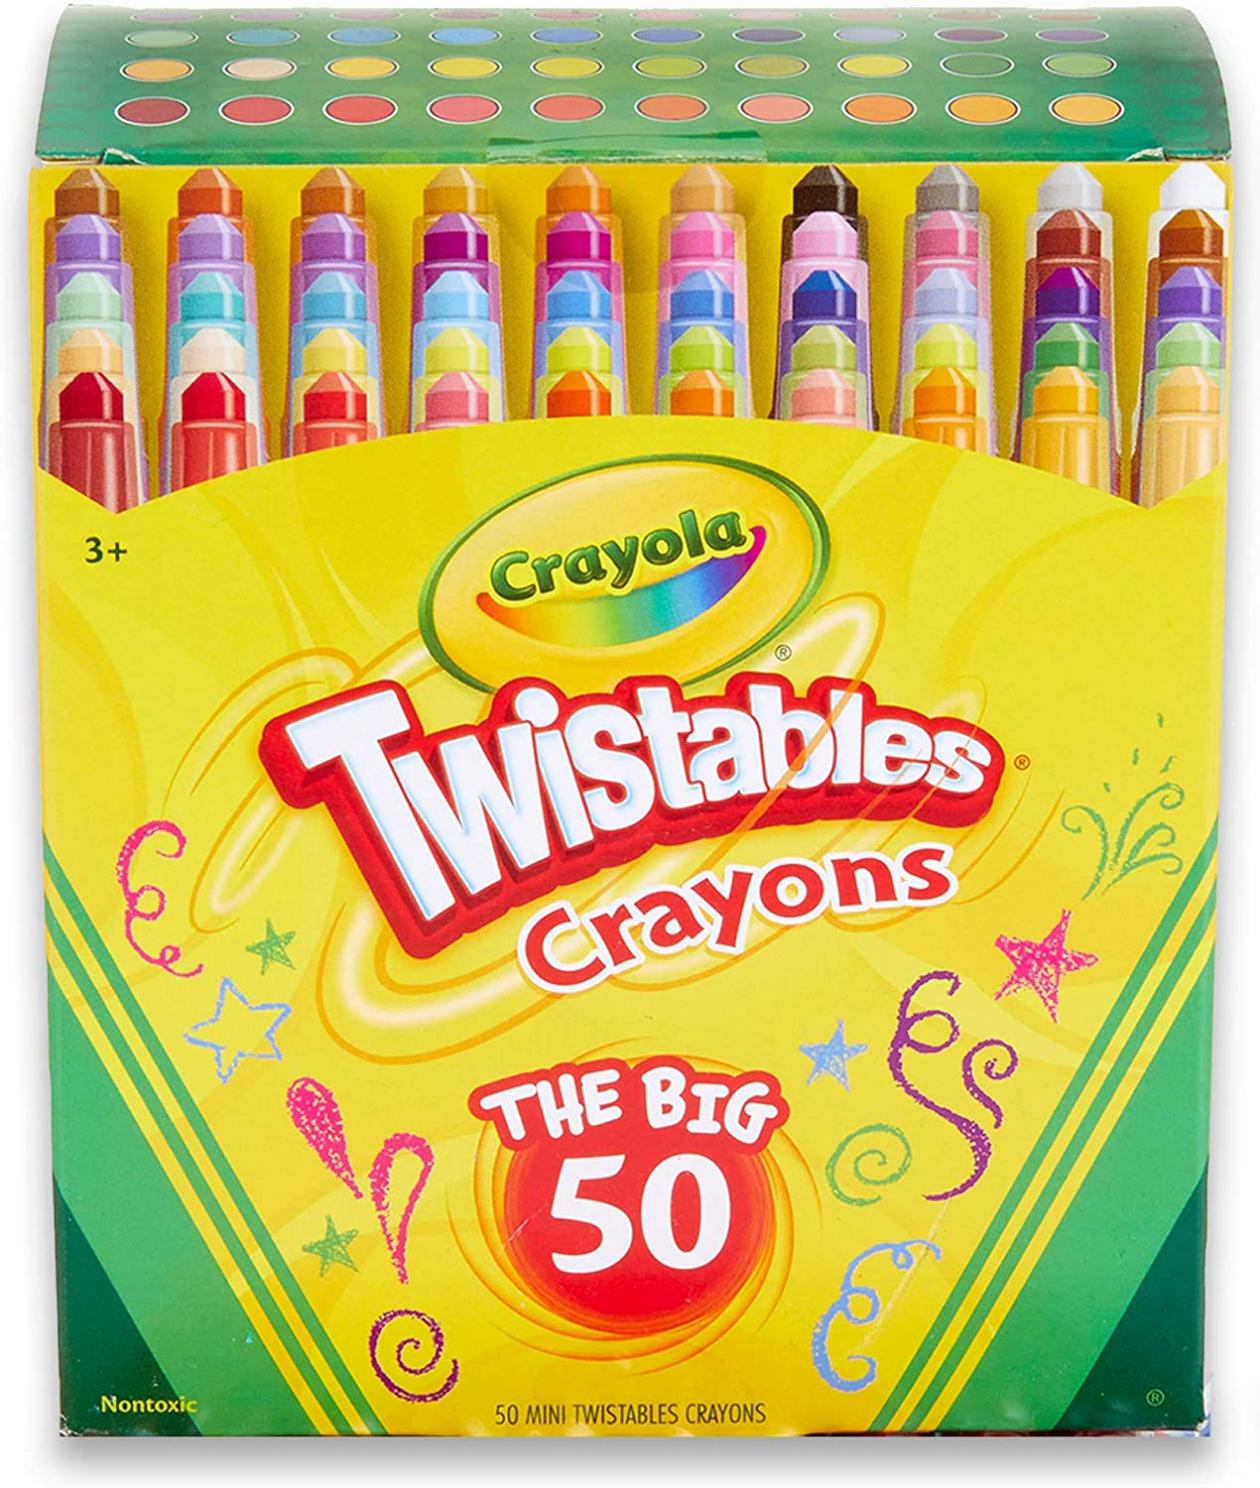 Crayola Mini Twistables Crayons Coloring Set (50 Count), Stocking Stuffers, Gifts for Kids Ages 3+